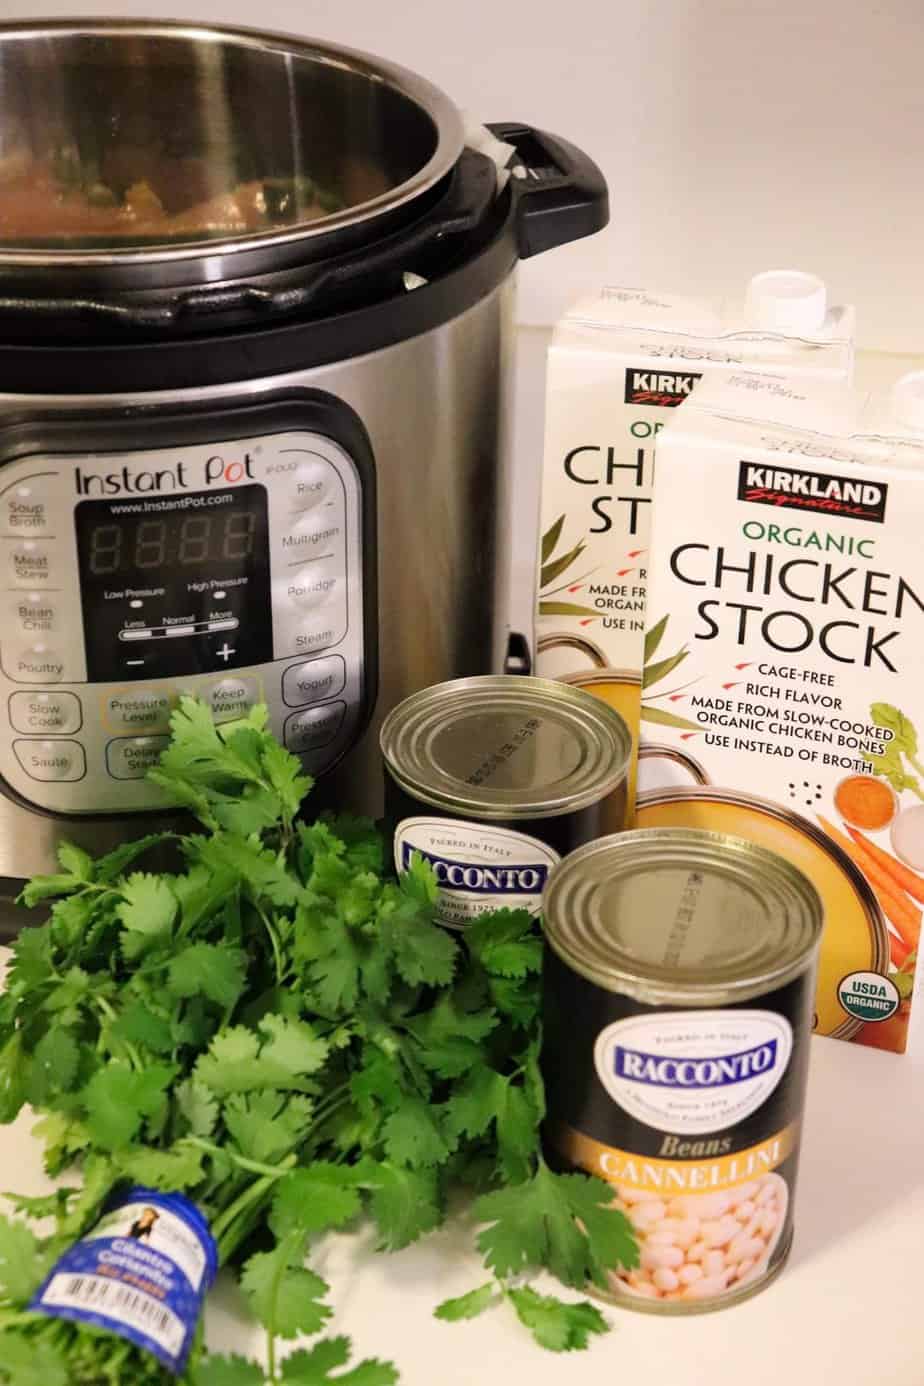 ingredients for soup shown in front of instant pot.